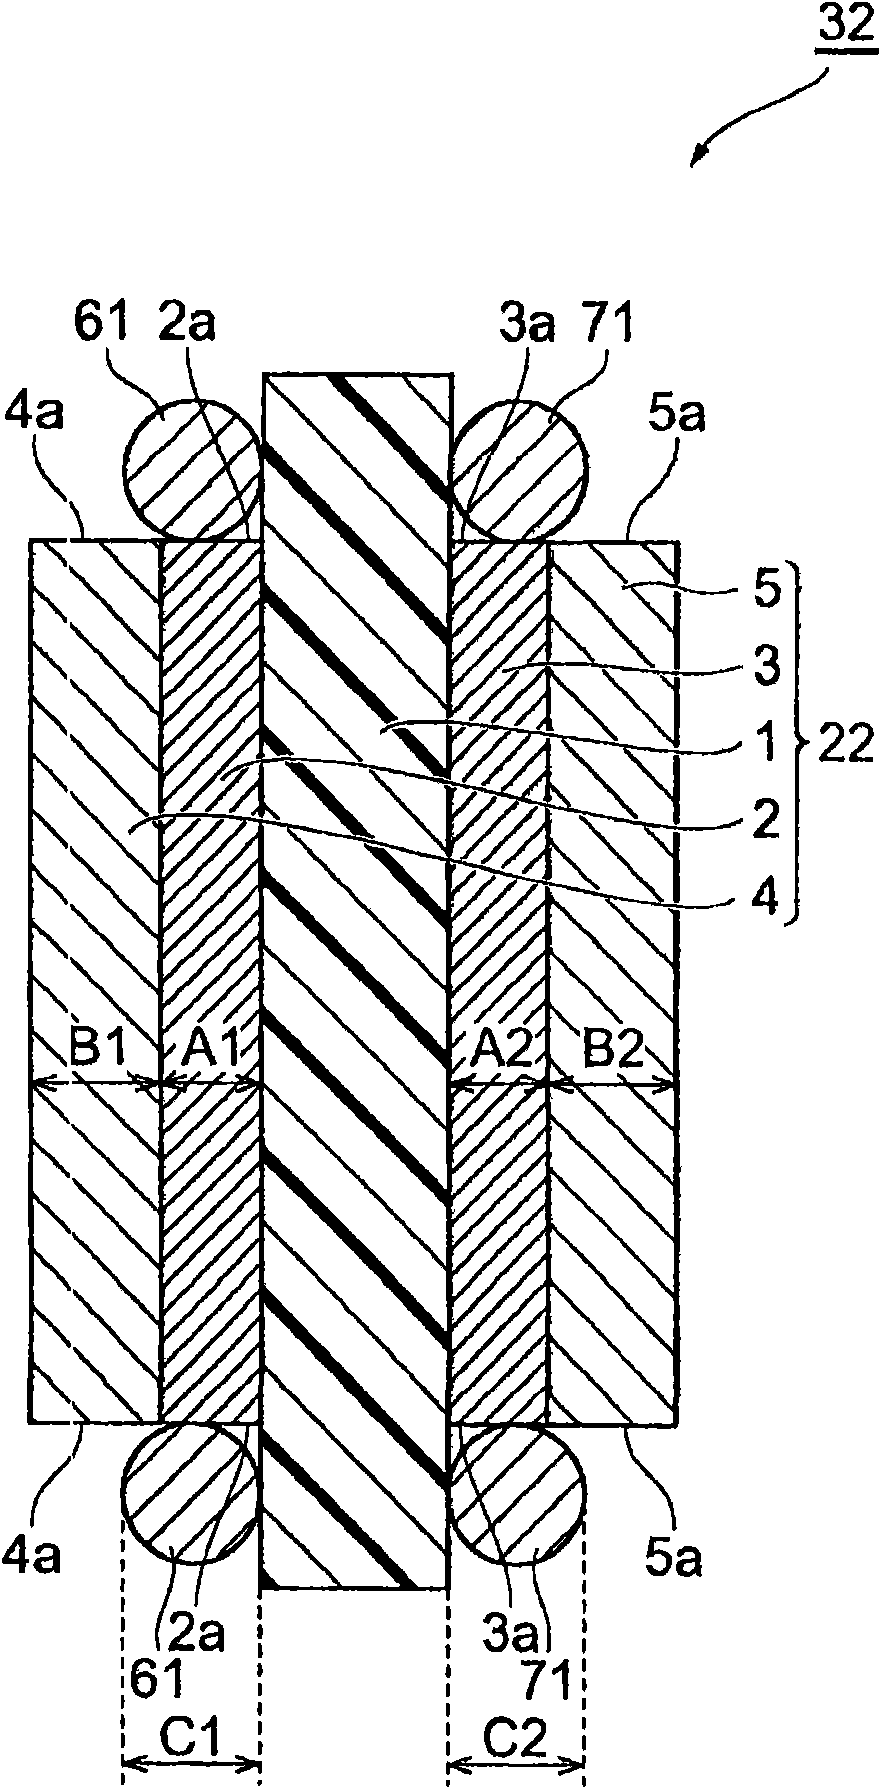 Assembly of membrane, electrode, gas diffusion layer and gasket, method for producing the same, and solid polymer fuel cell